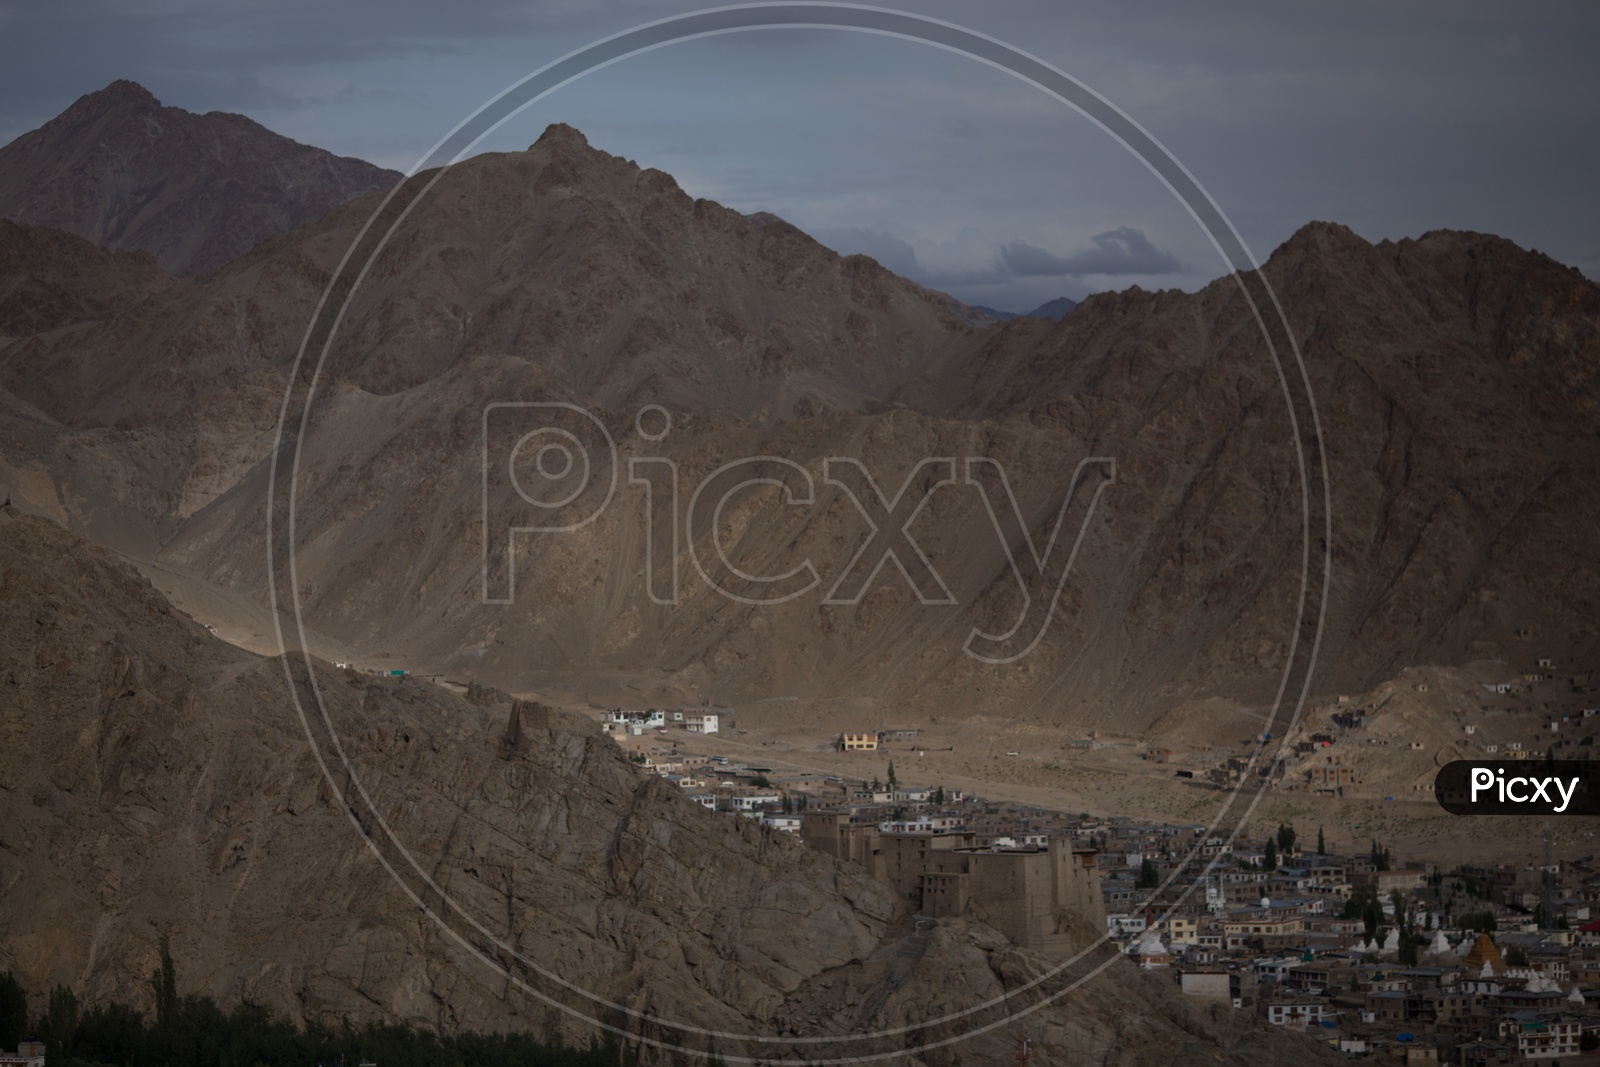 Mountains of leh with houses in foreground